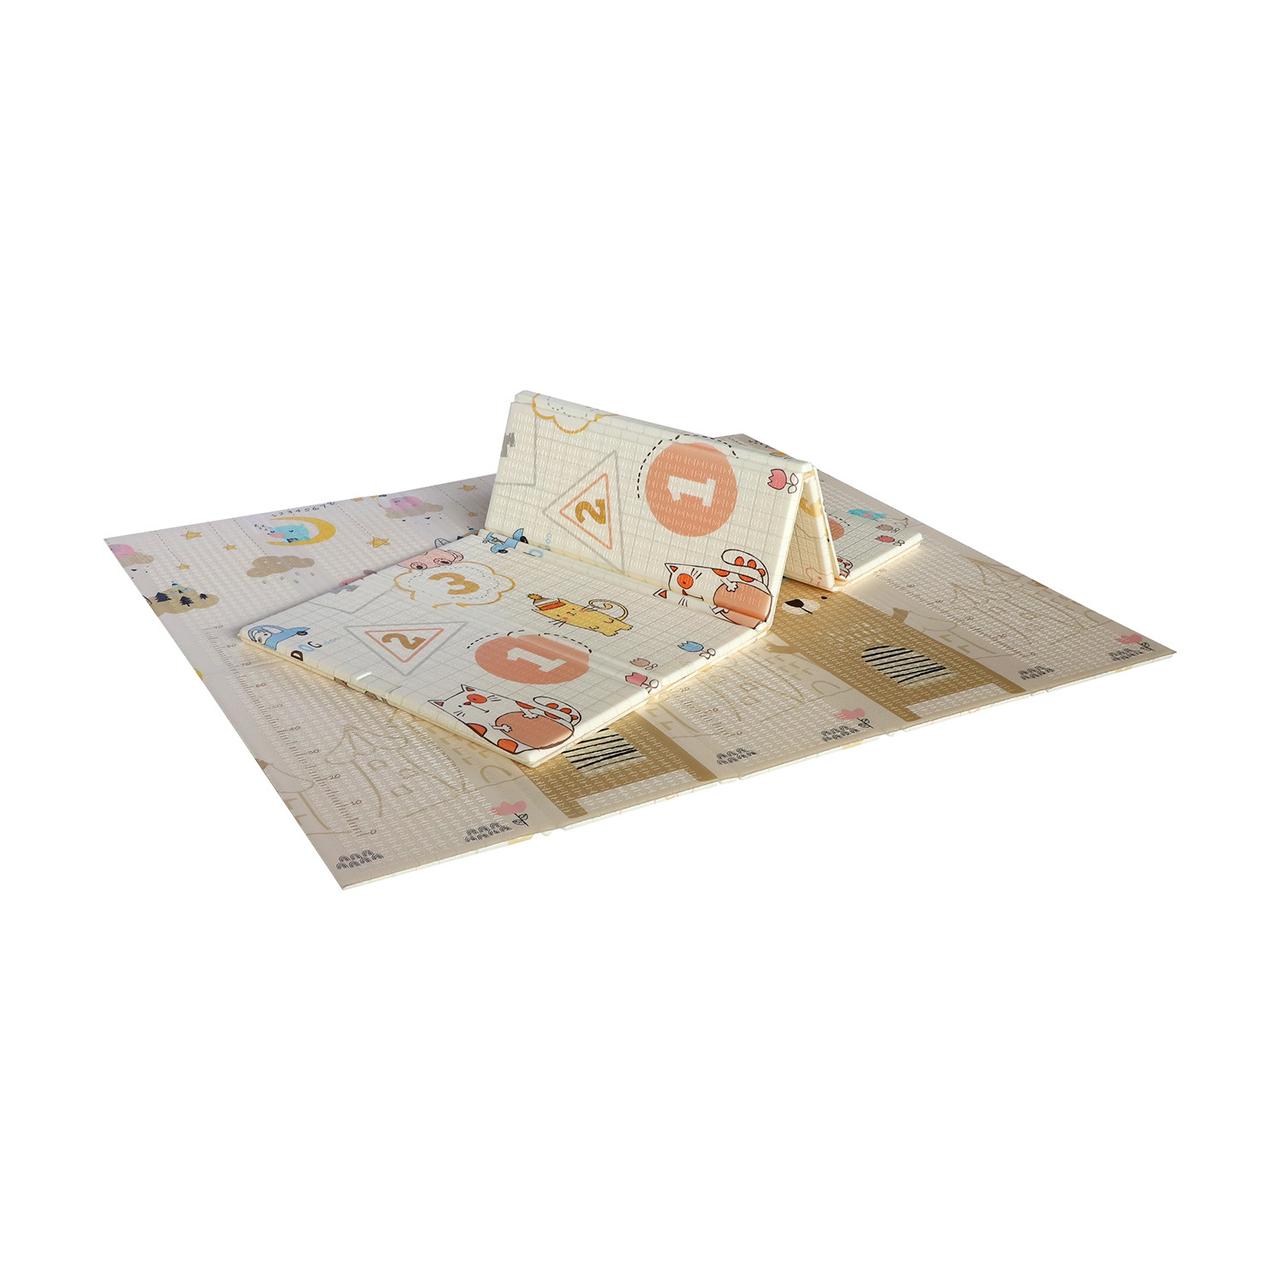 Pibi Junior Kingdom Themed Printed and Foldable Playmat Extra Large (180cm*200cm) Age- 6 Months & Above